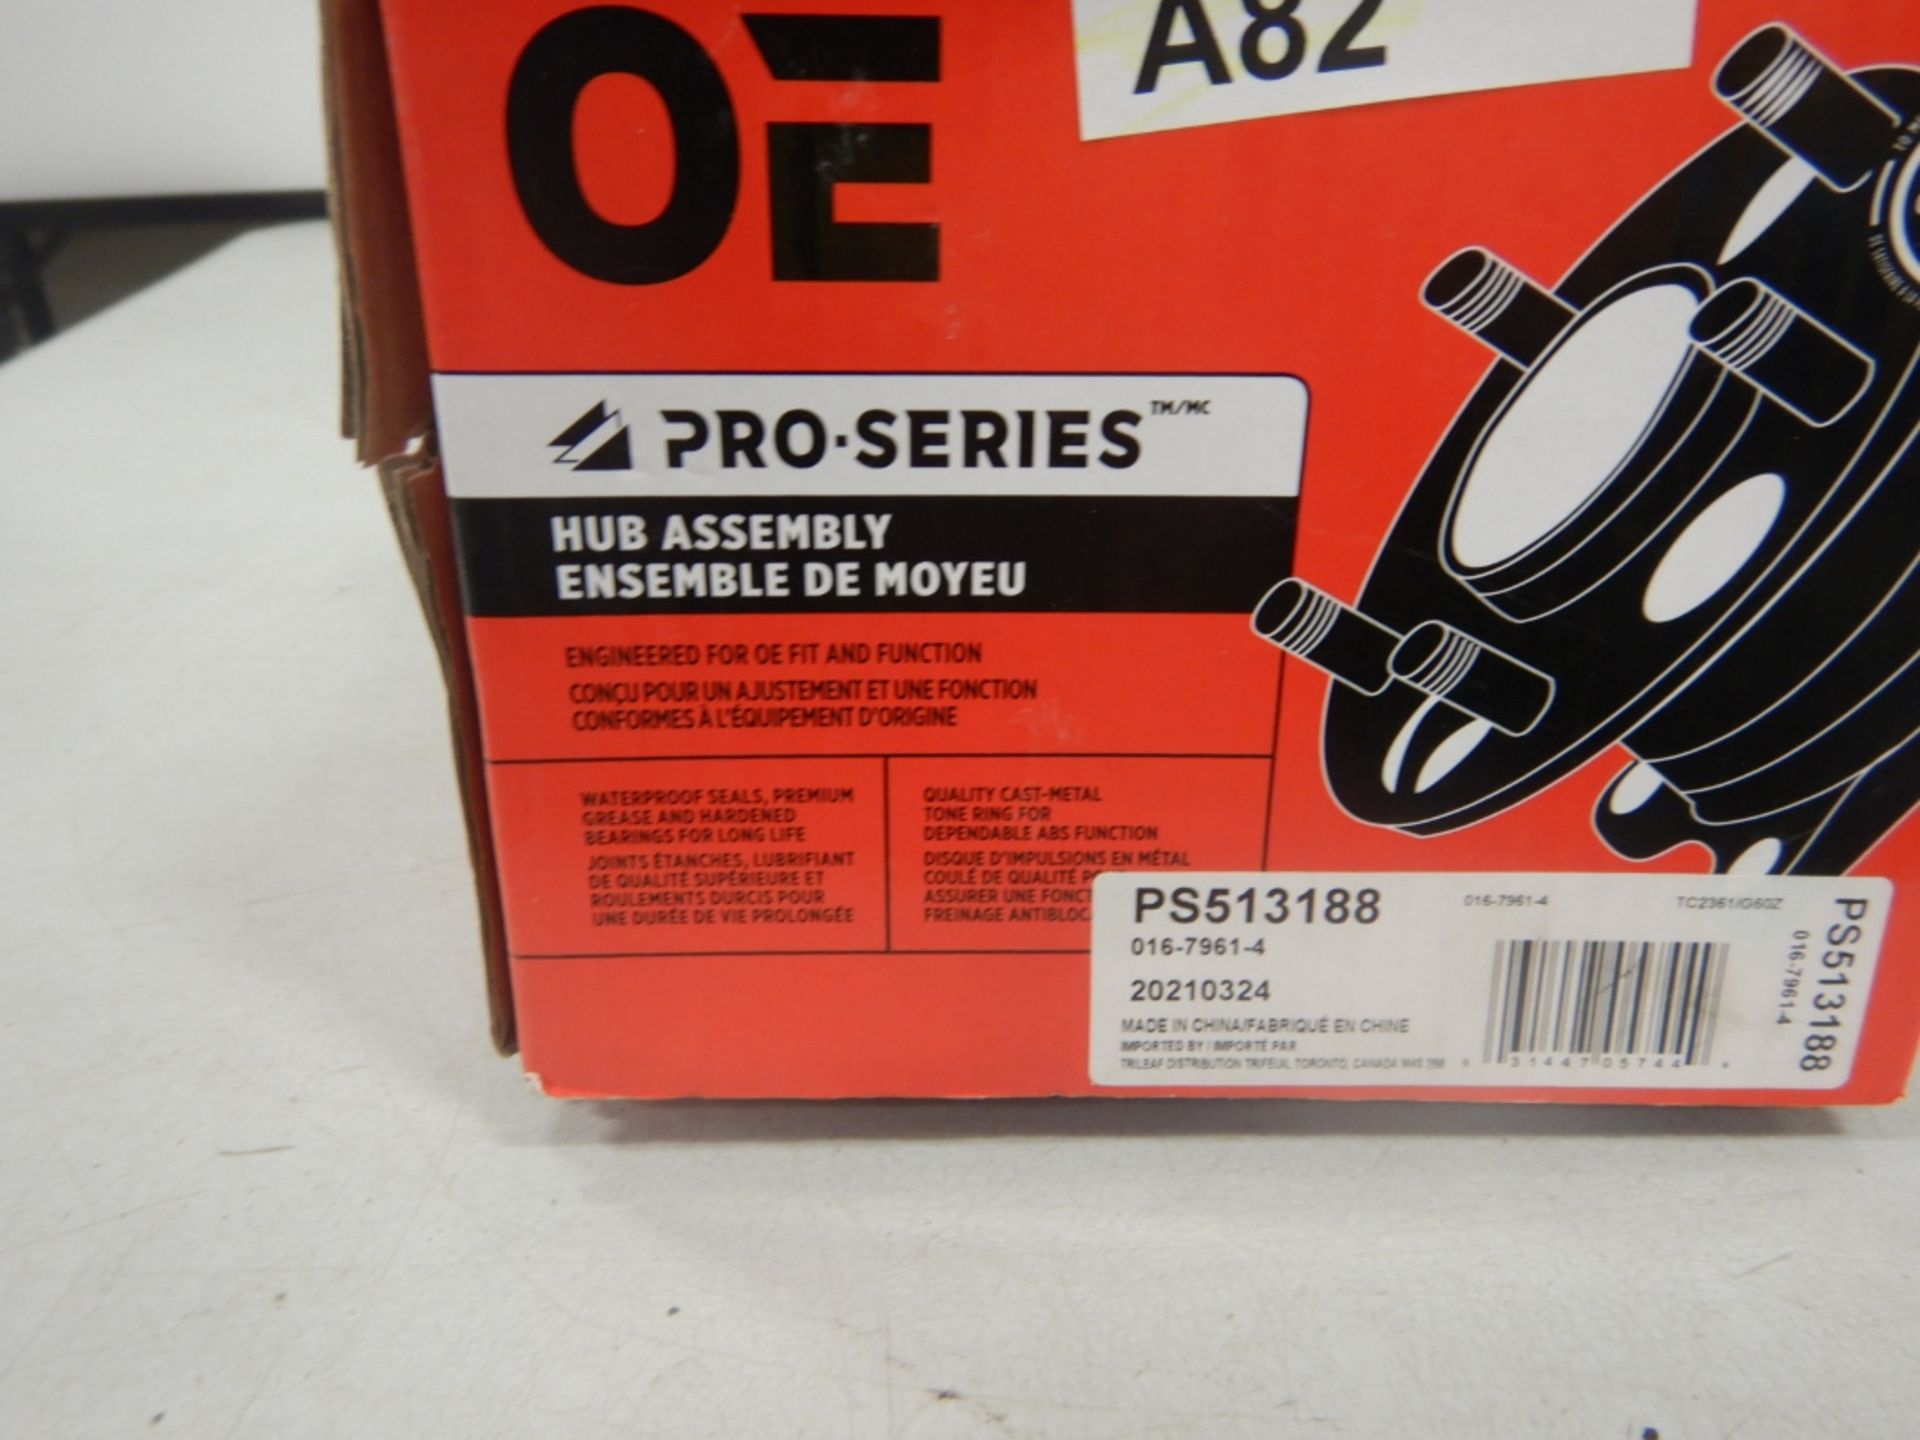 A82 - OE PRO-SERIES HUB ASSEMBLY PS513188 - Image 2 of 3